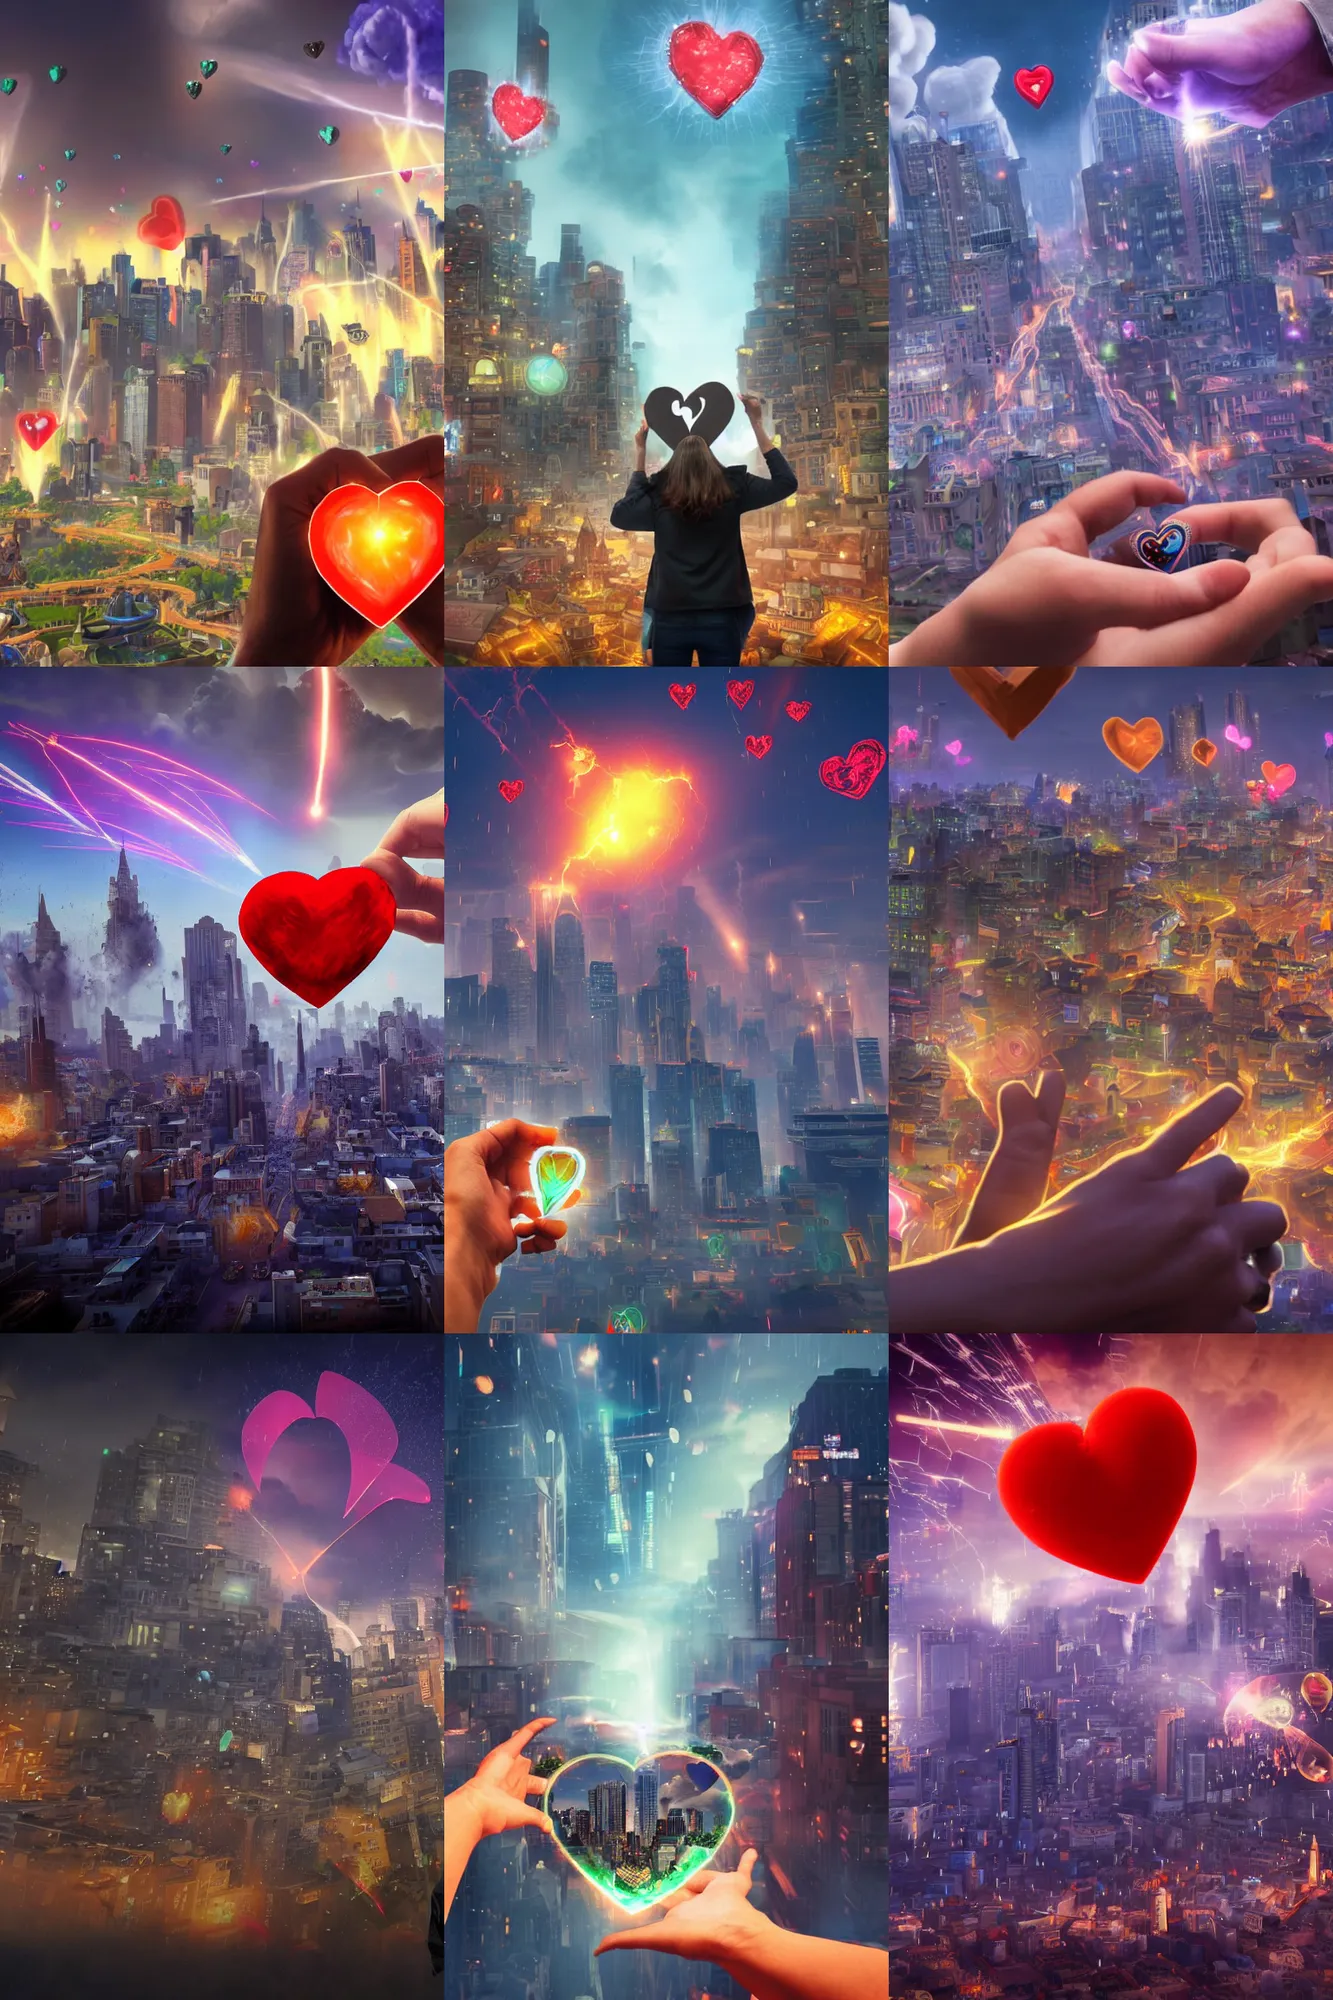 Prompt: hyperrealistic photo of a a cityscape with a large heart in the center, with buildings and bombs raining down from it. in the foreground is a person's hand, reaching out towards the heart, medium angle, in the style of hearthstone game